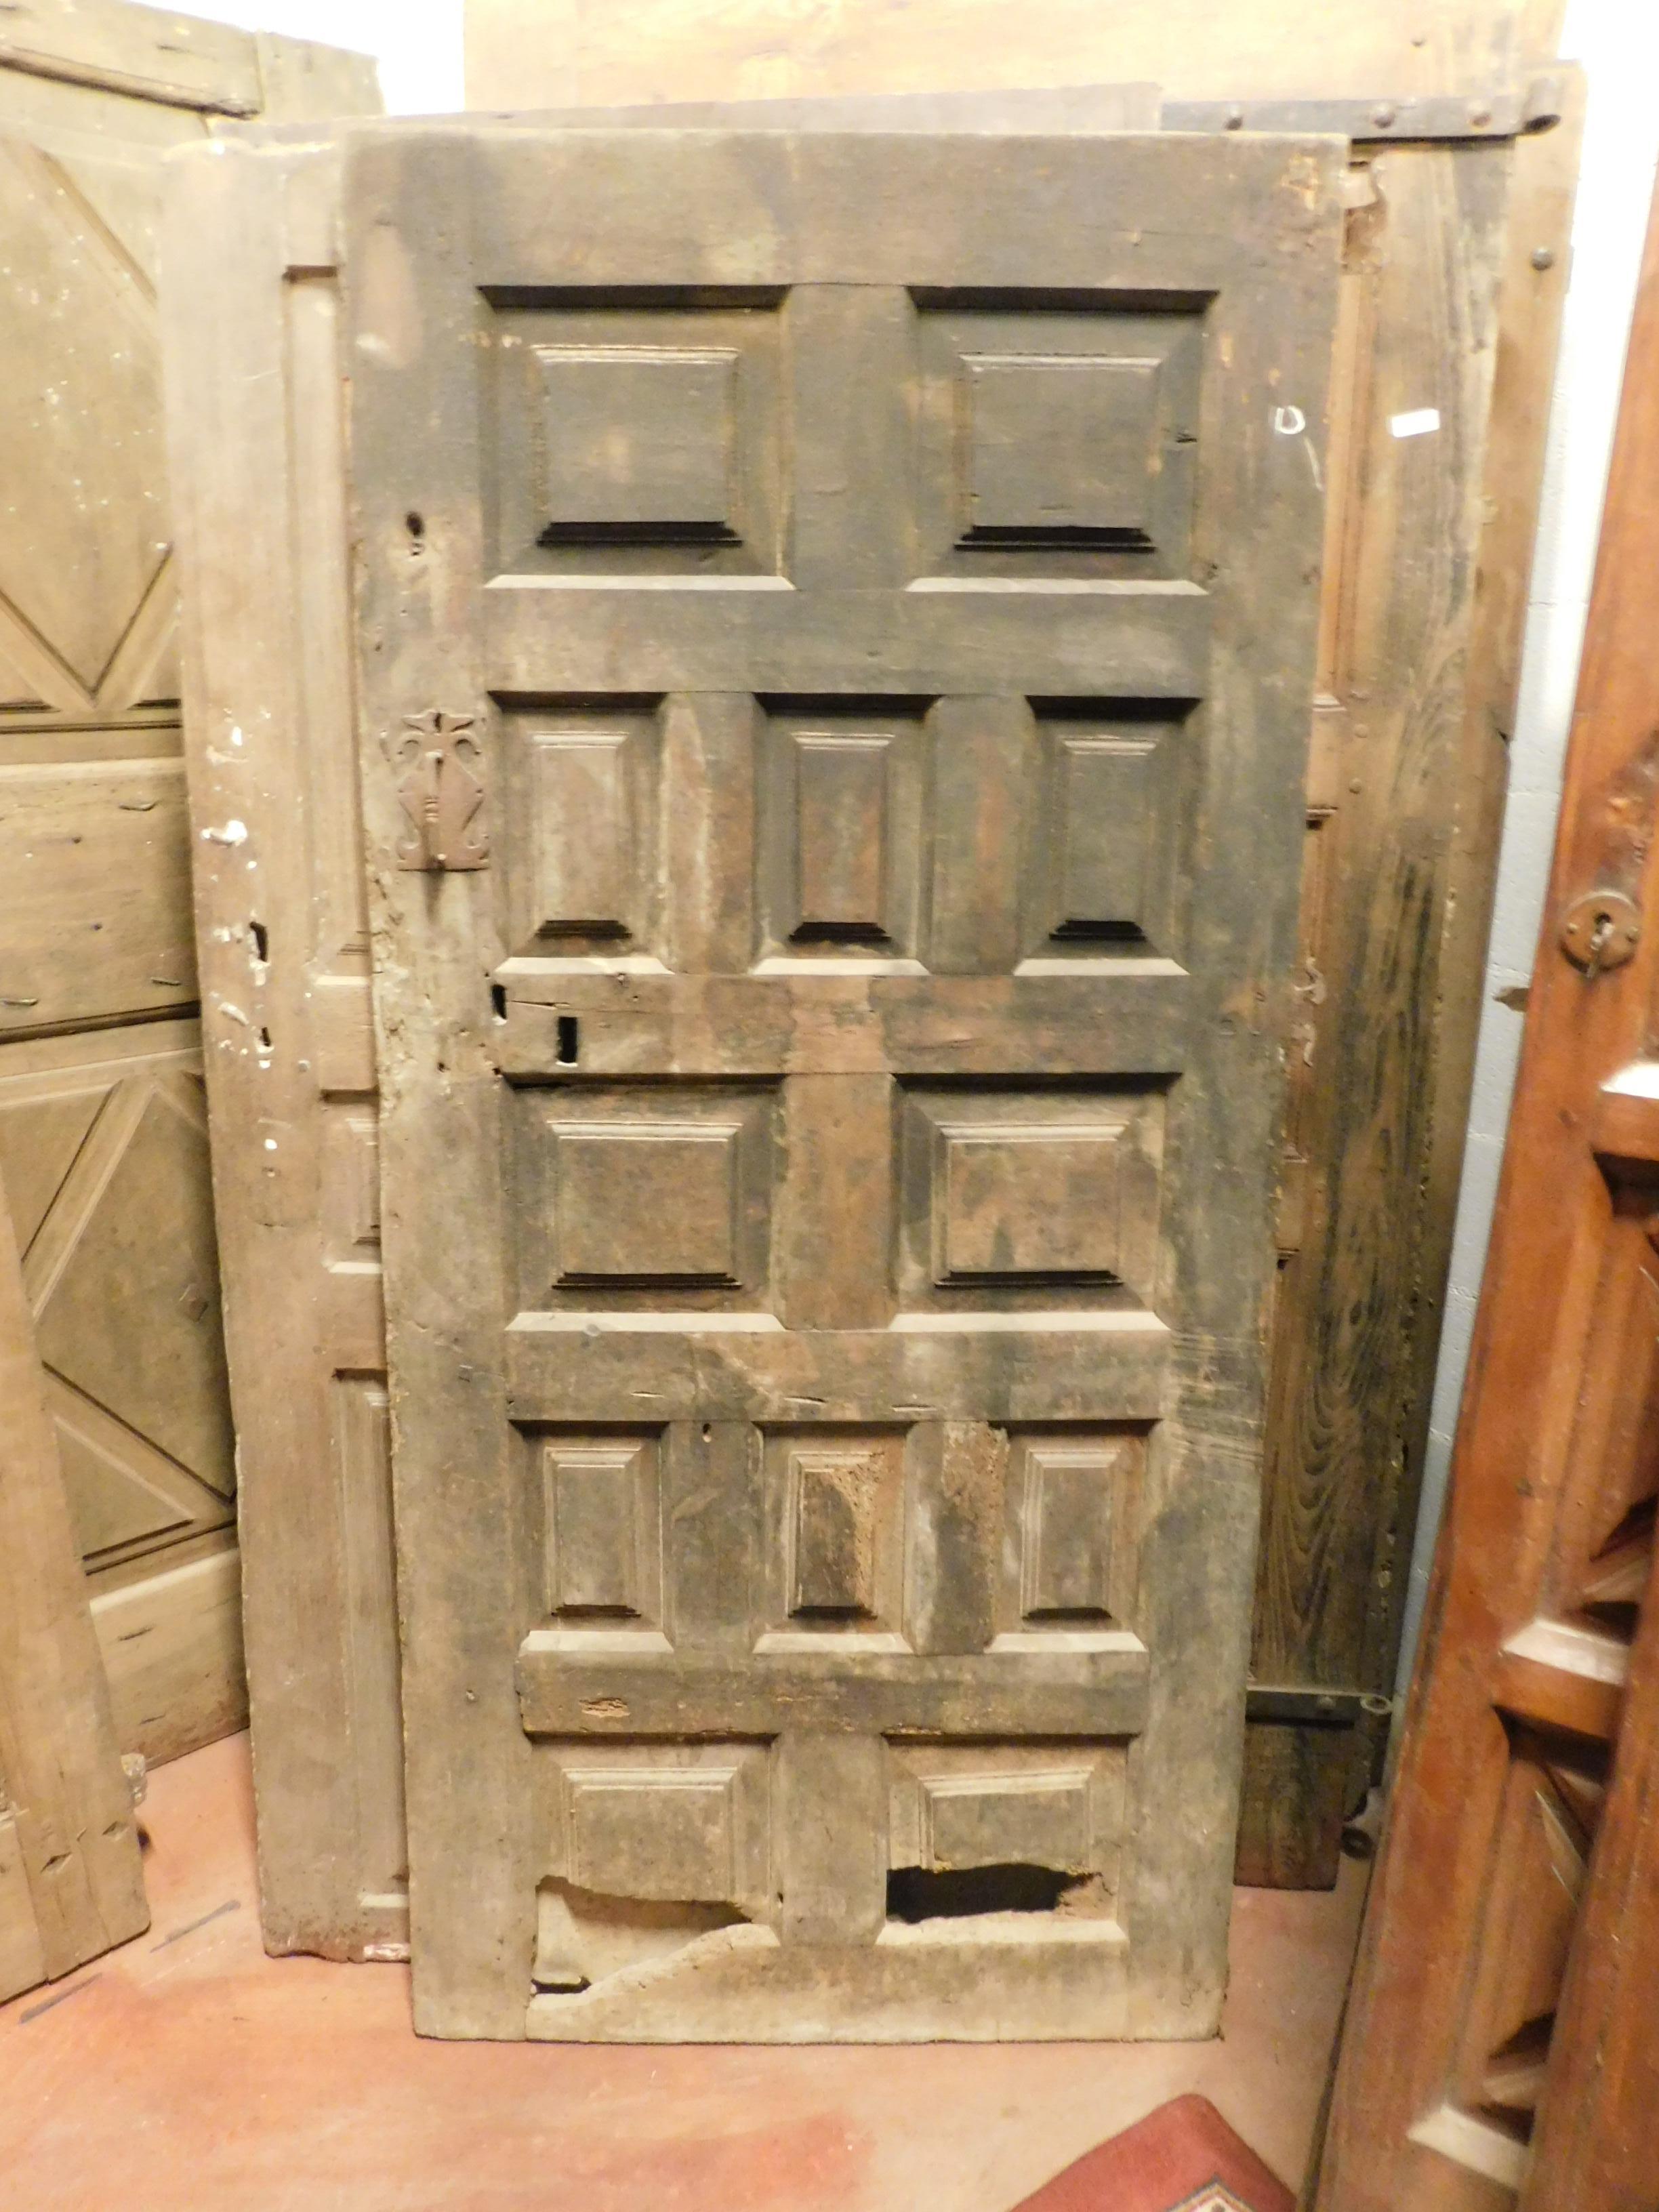 Ancient rustic paneled door, to be restored because it was very old, was in a rustic dwelling in Spain, in the 17th century.
Excellent wood, perfect in rustic but modern environments, such as wine cellars or side entrances to farmhouses.